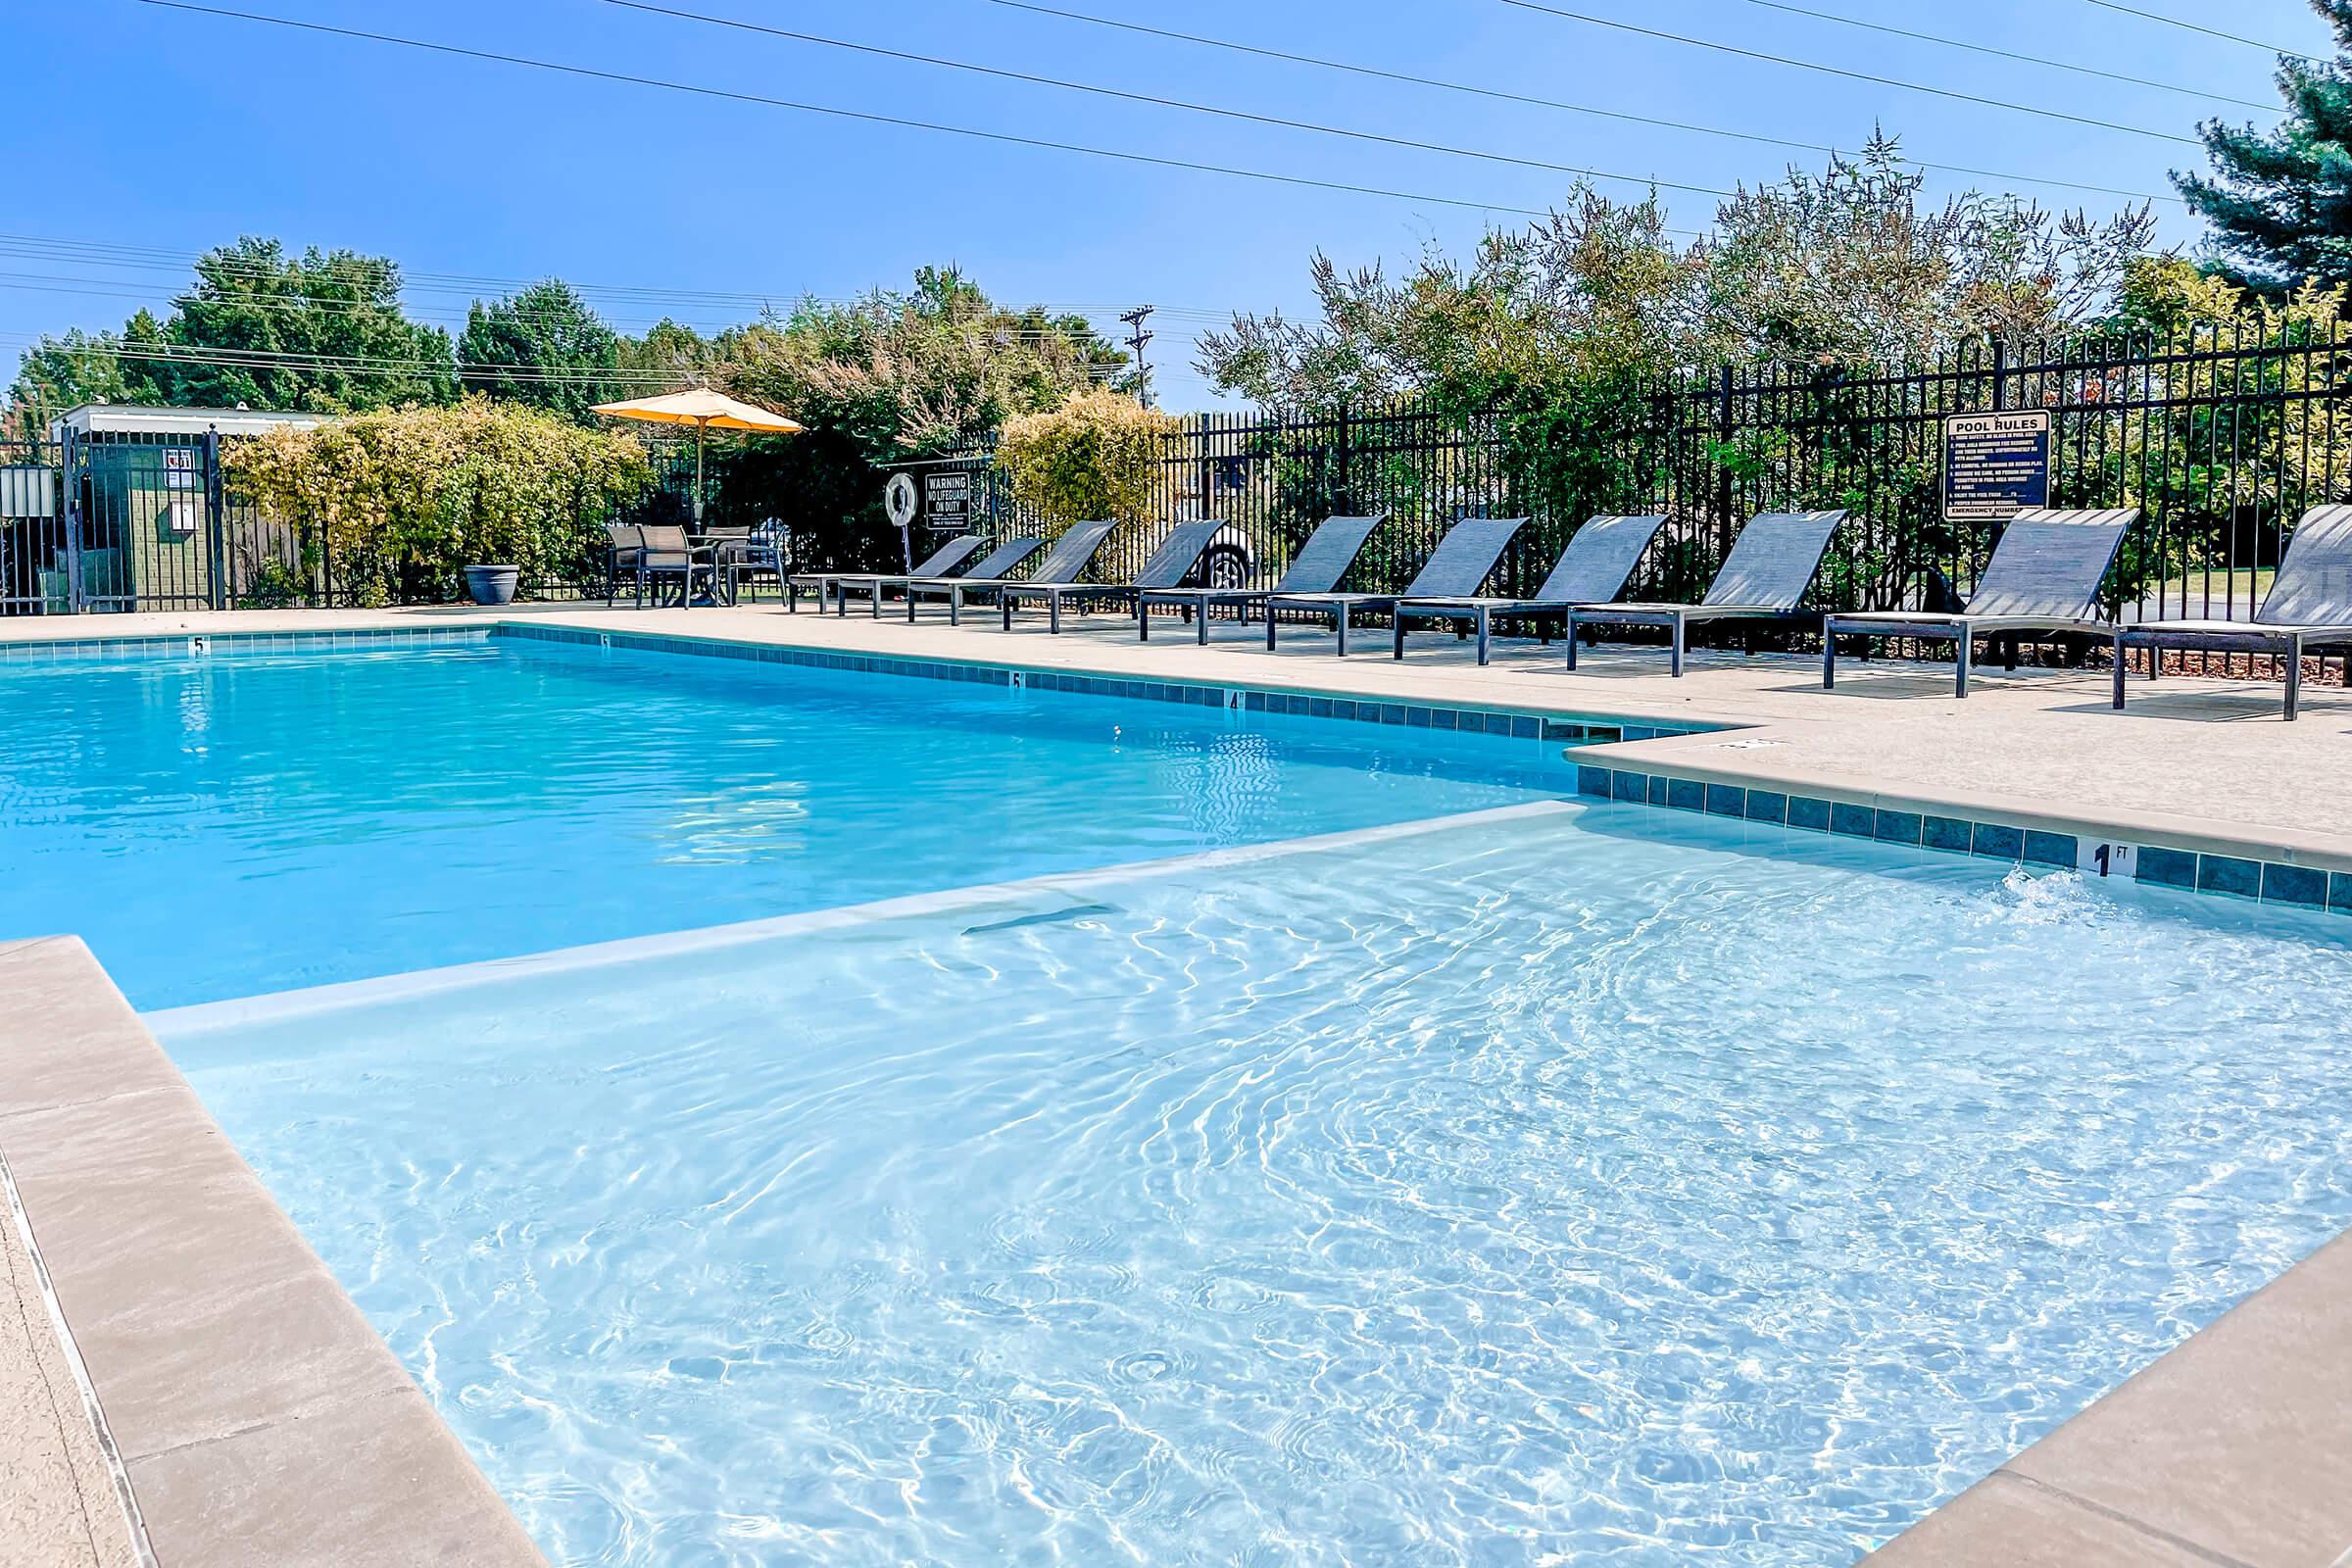 Make Waves in our Sparkling Swimming Pool